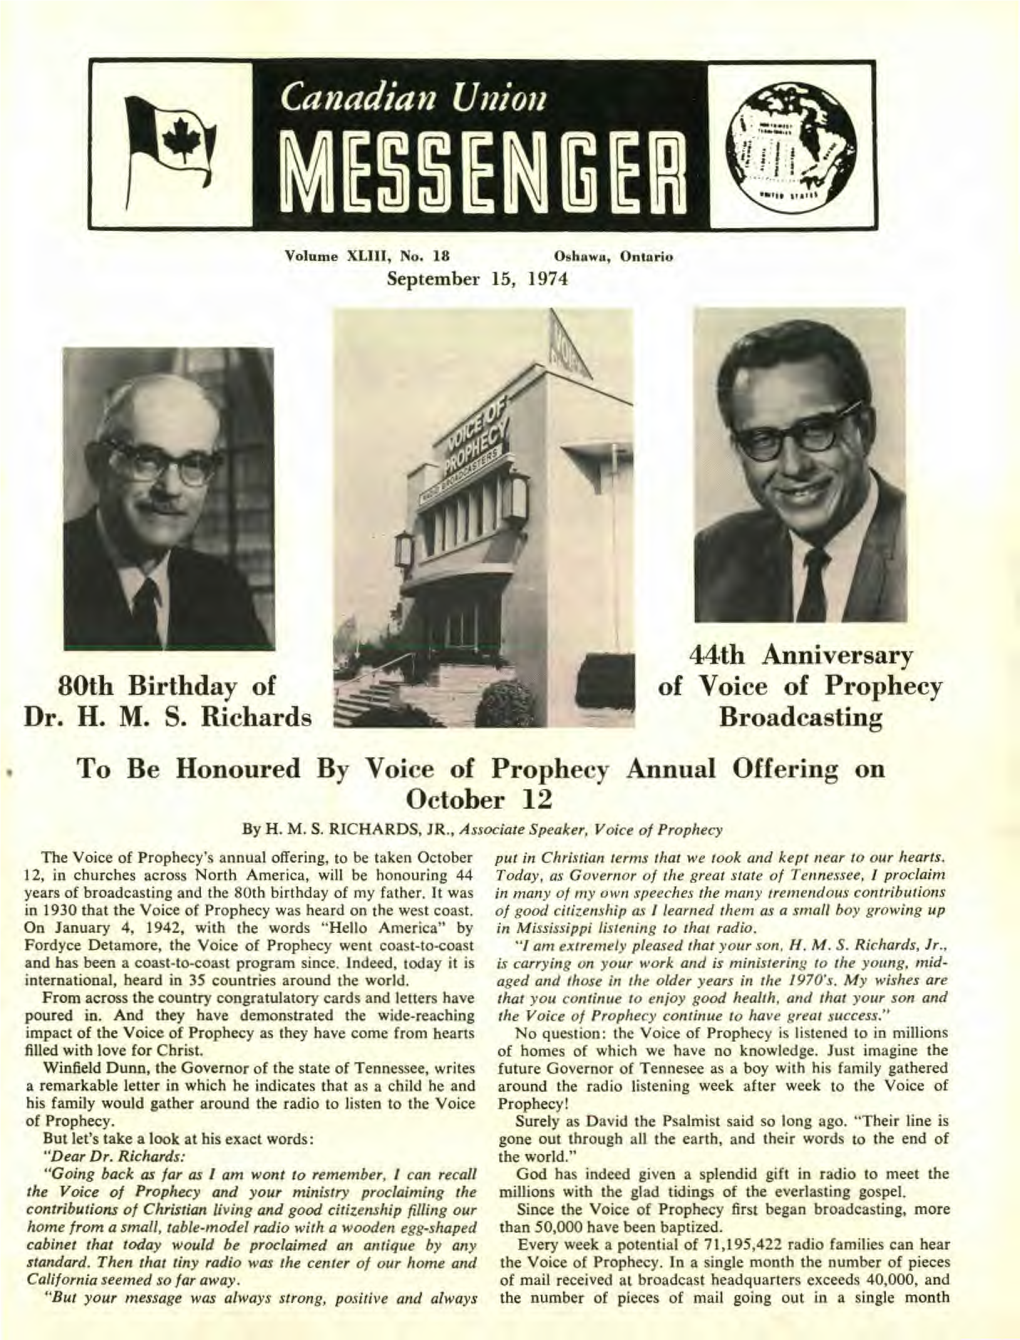 Canadian Union Messenger for 1974